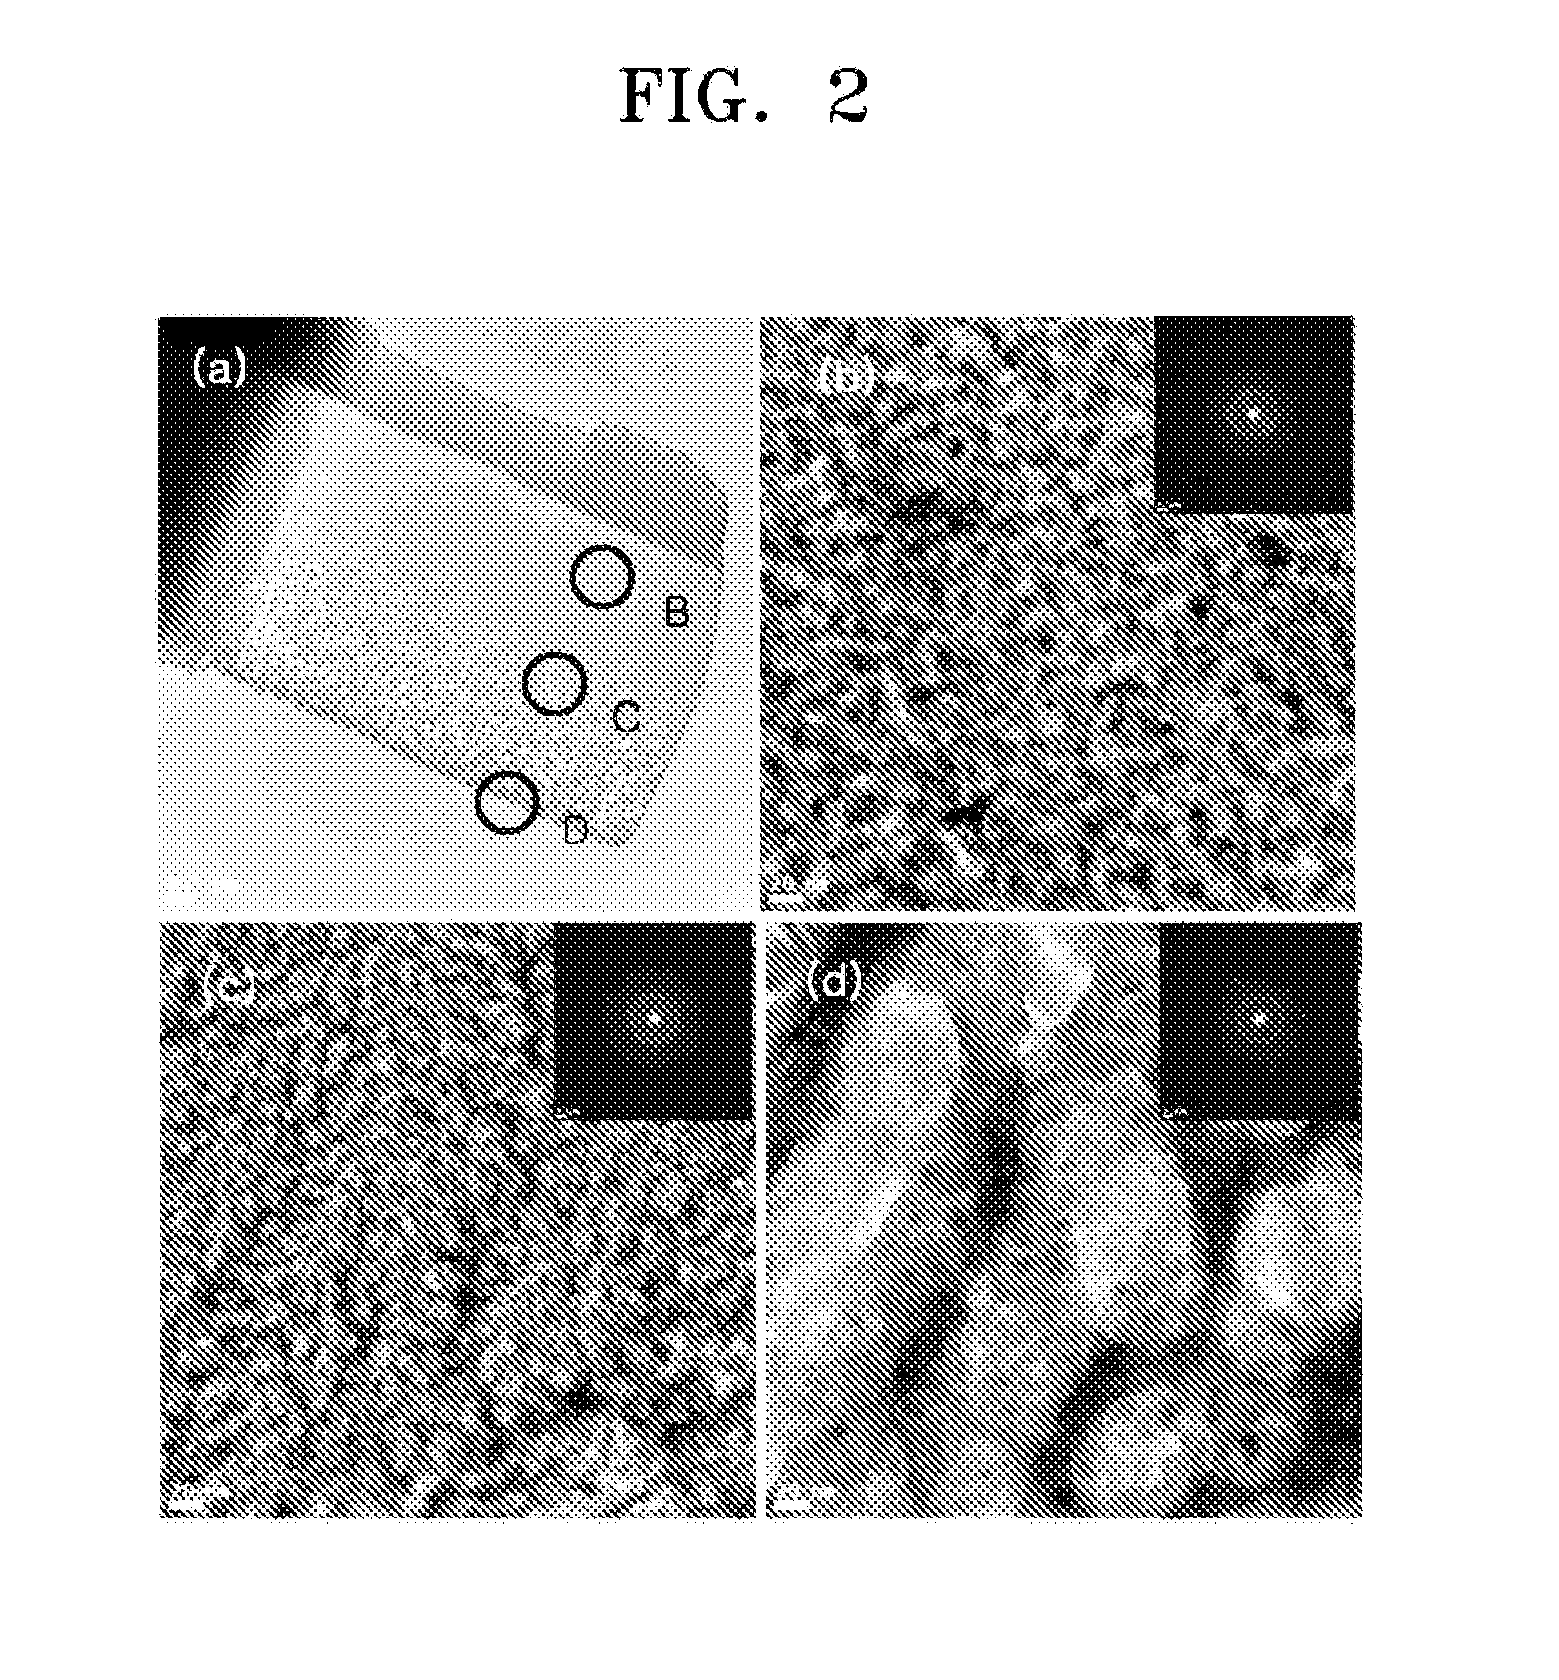 Negative  active  material  for secondary  battery  and  method  of manufacturing  the  same